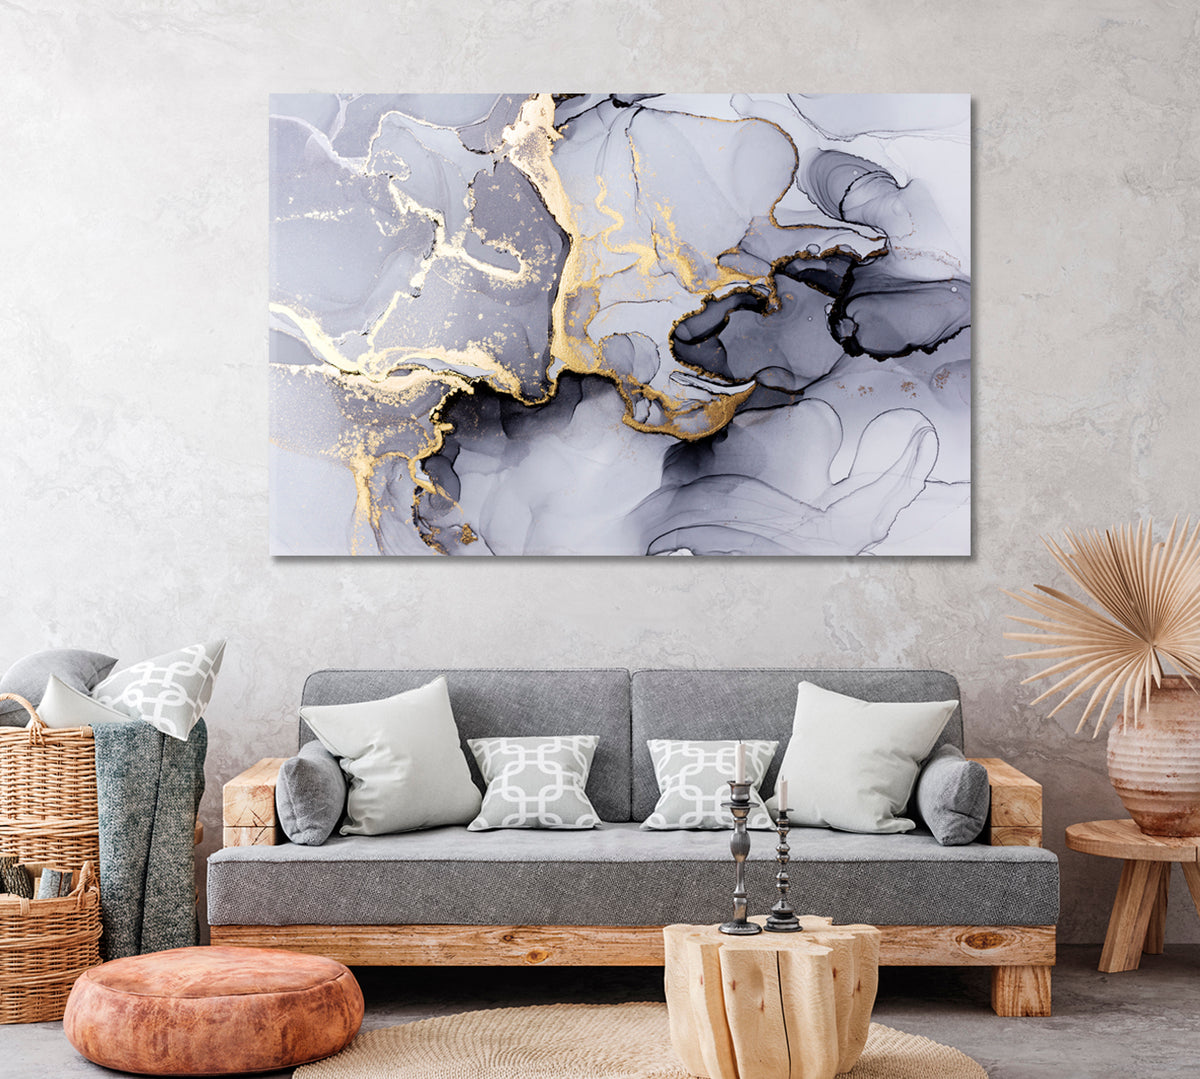 Liquid Gray Marble with Golden Veins Canvas Print ArtLexy 1 Panel 24"x16" inches 